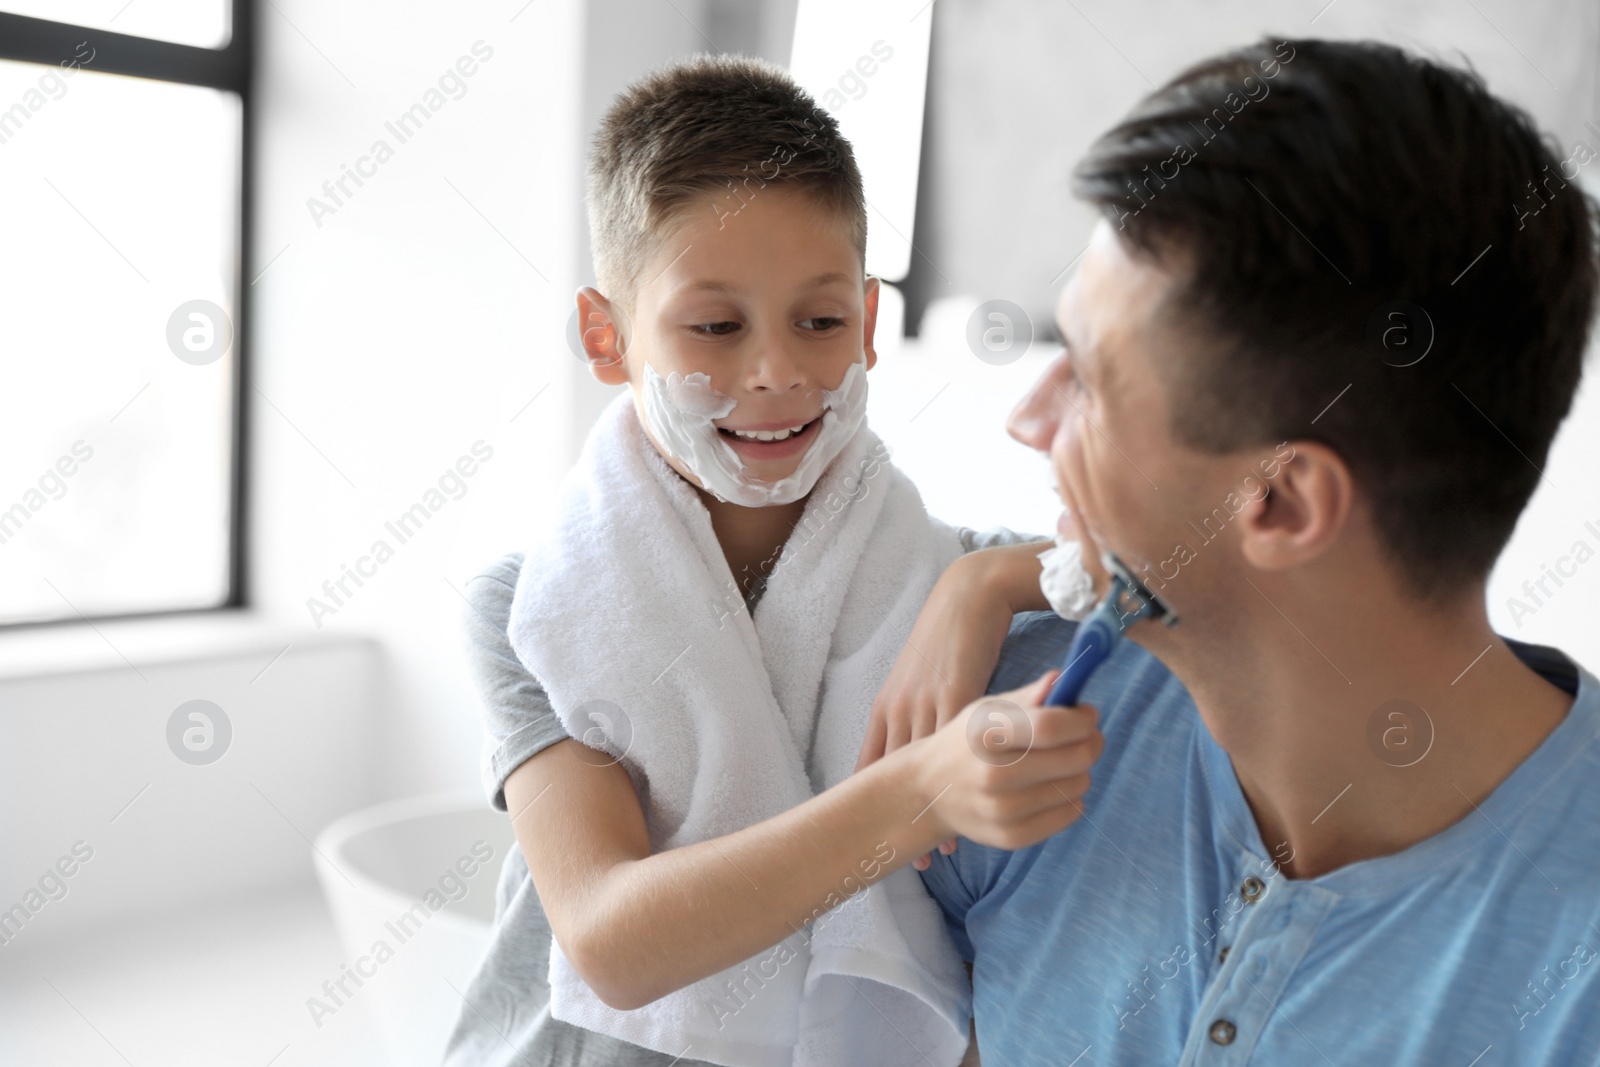 Photo of Son shaving his father with razor in bathroom